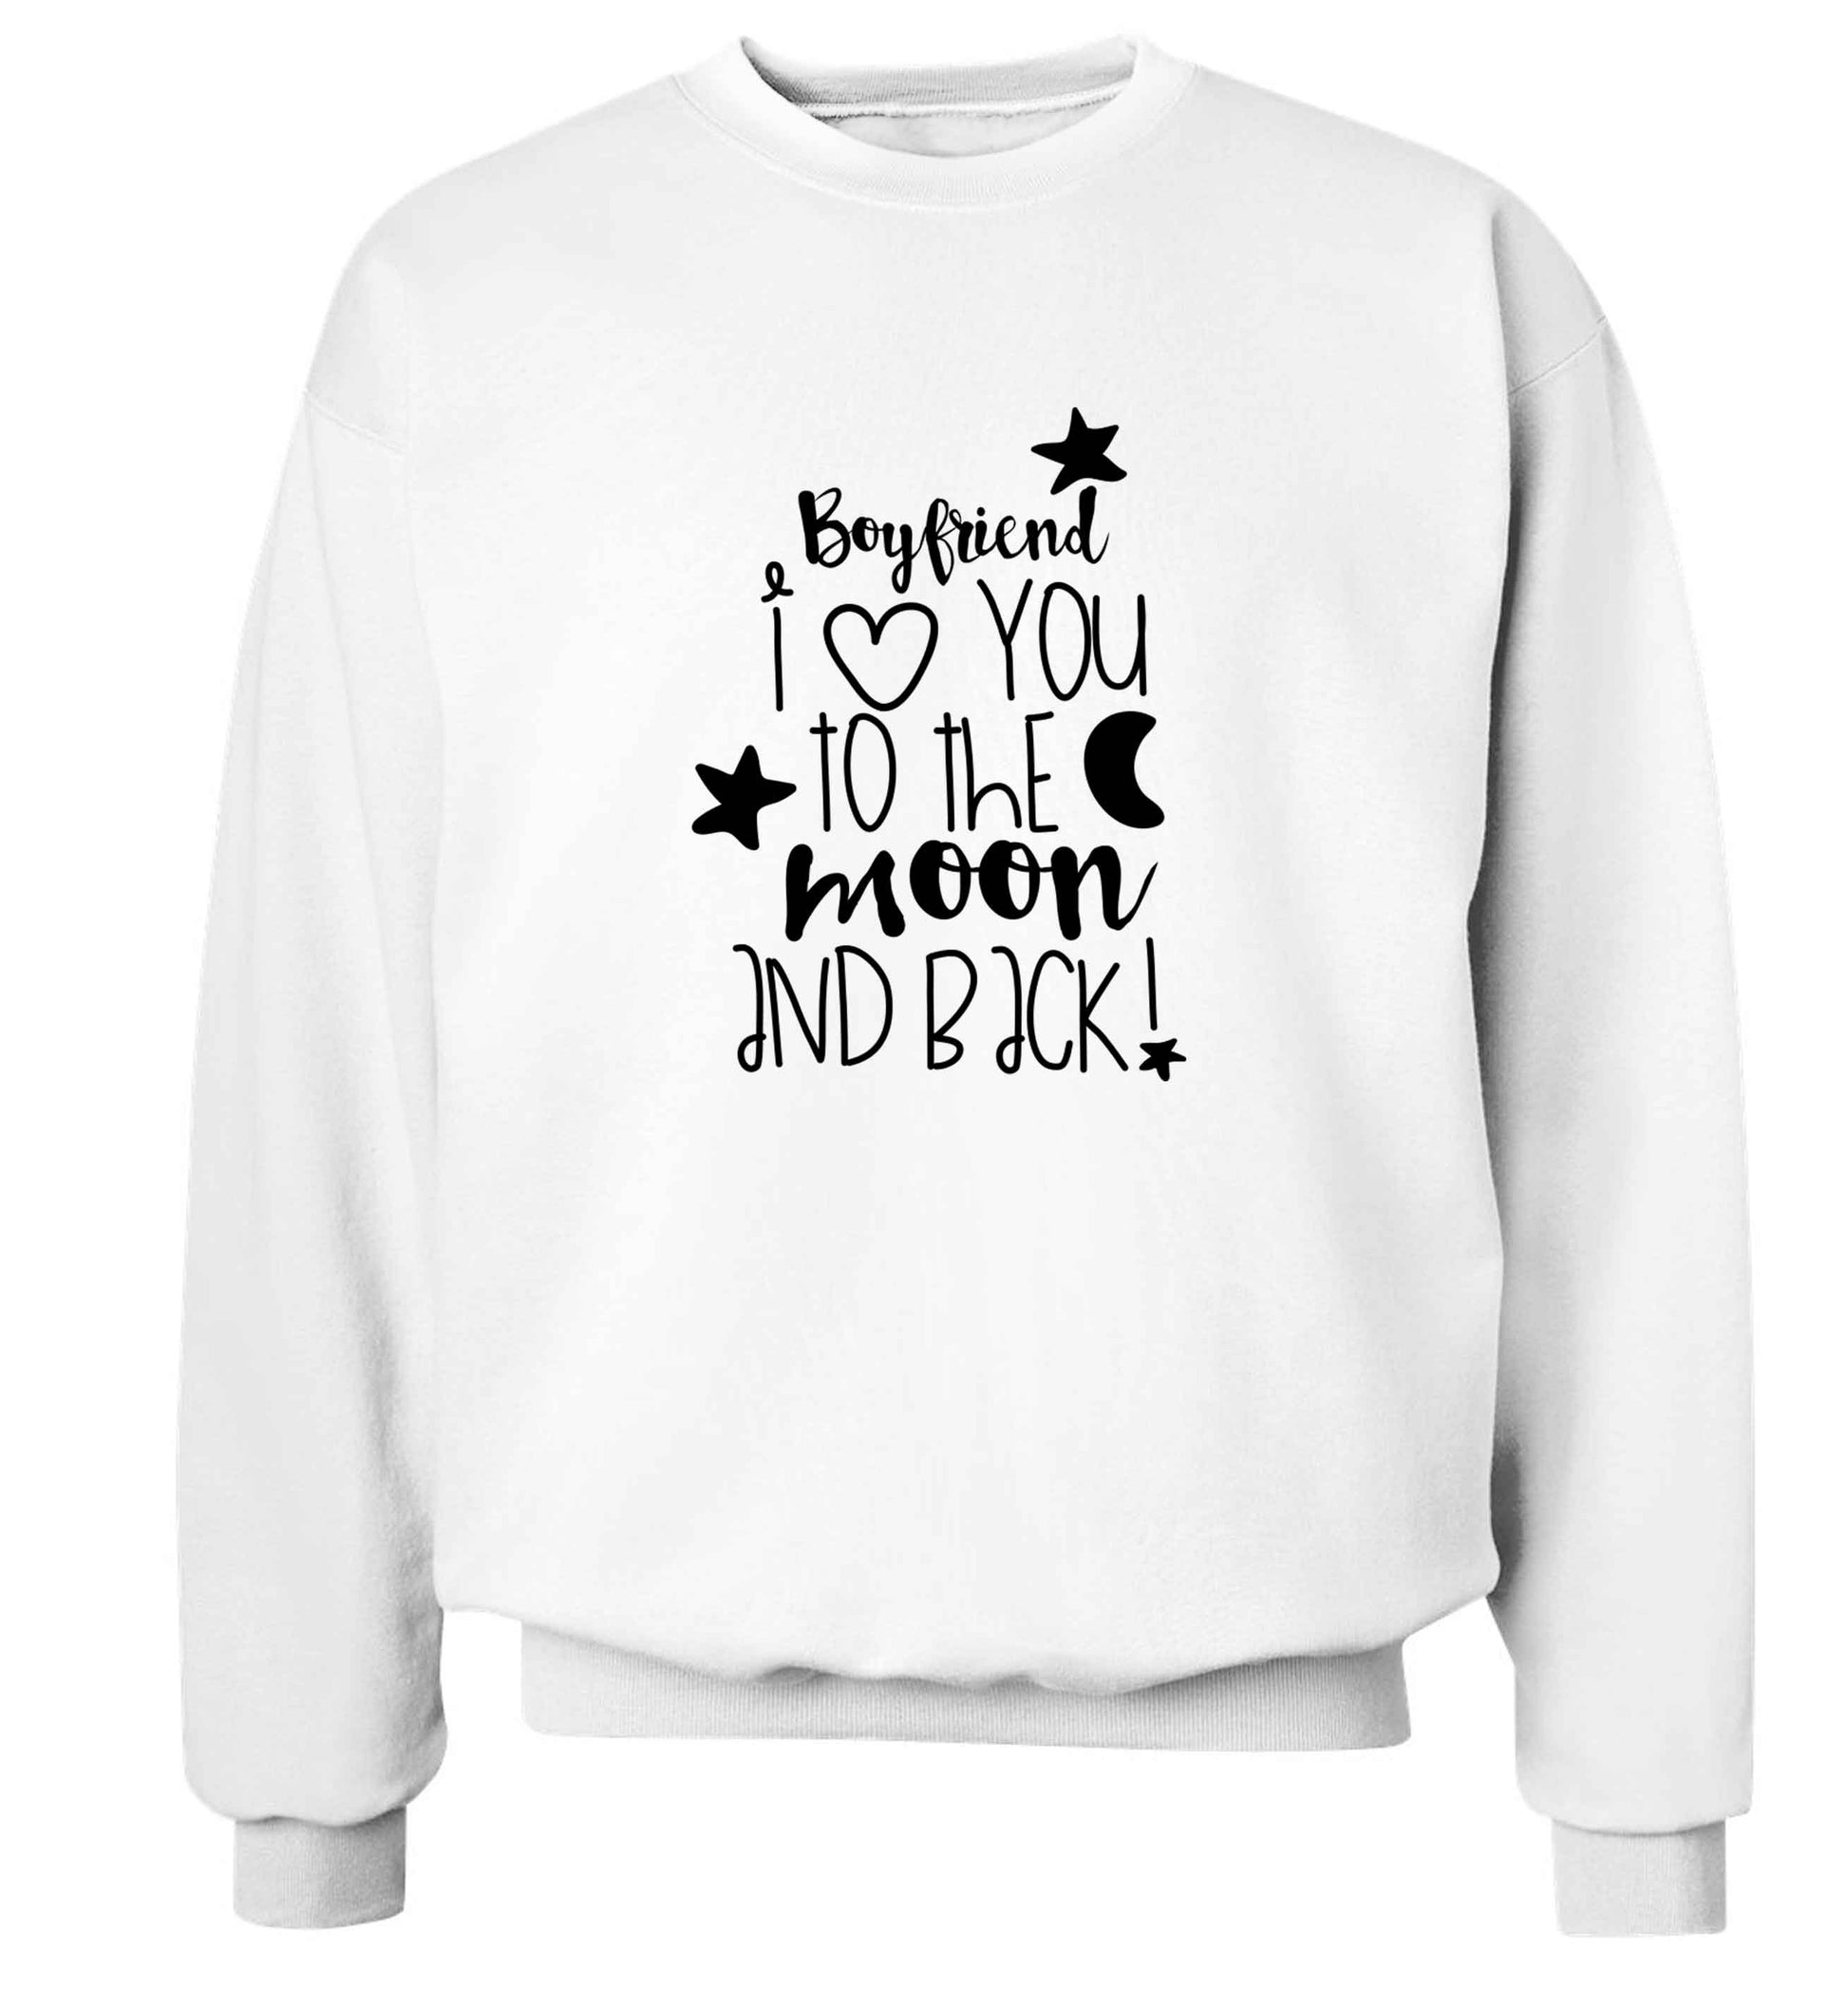 Boyfriend I love you to the moon and back adult's unisex white sweater 2XL